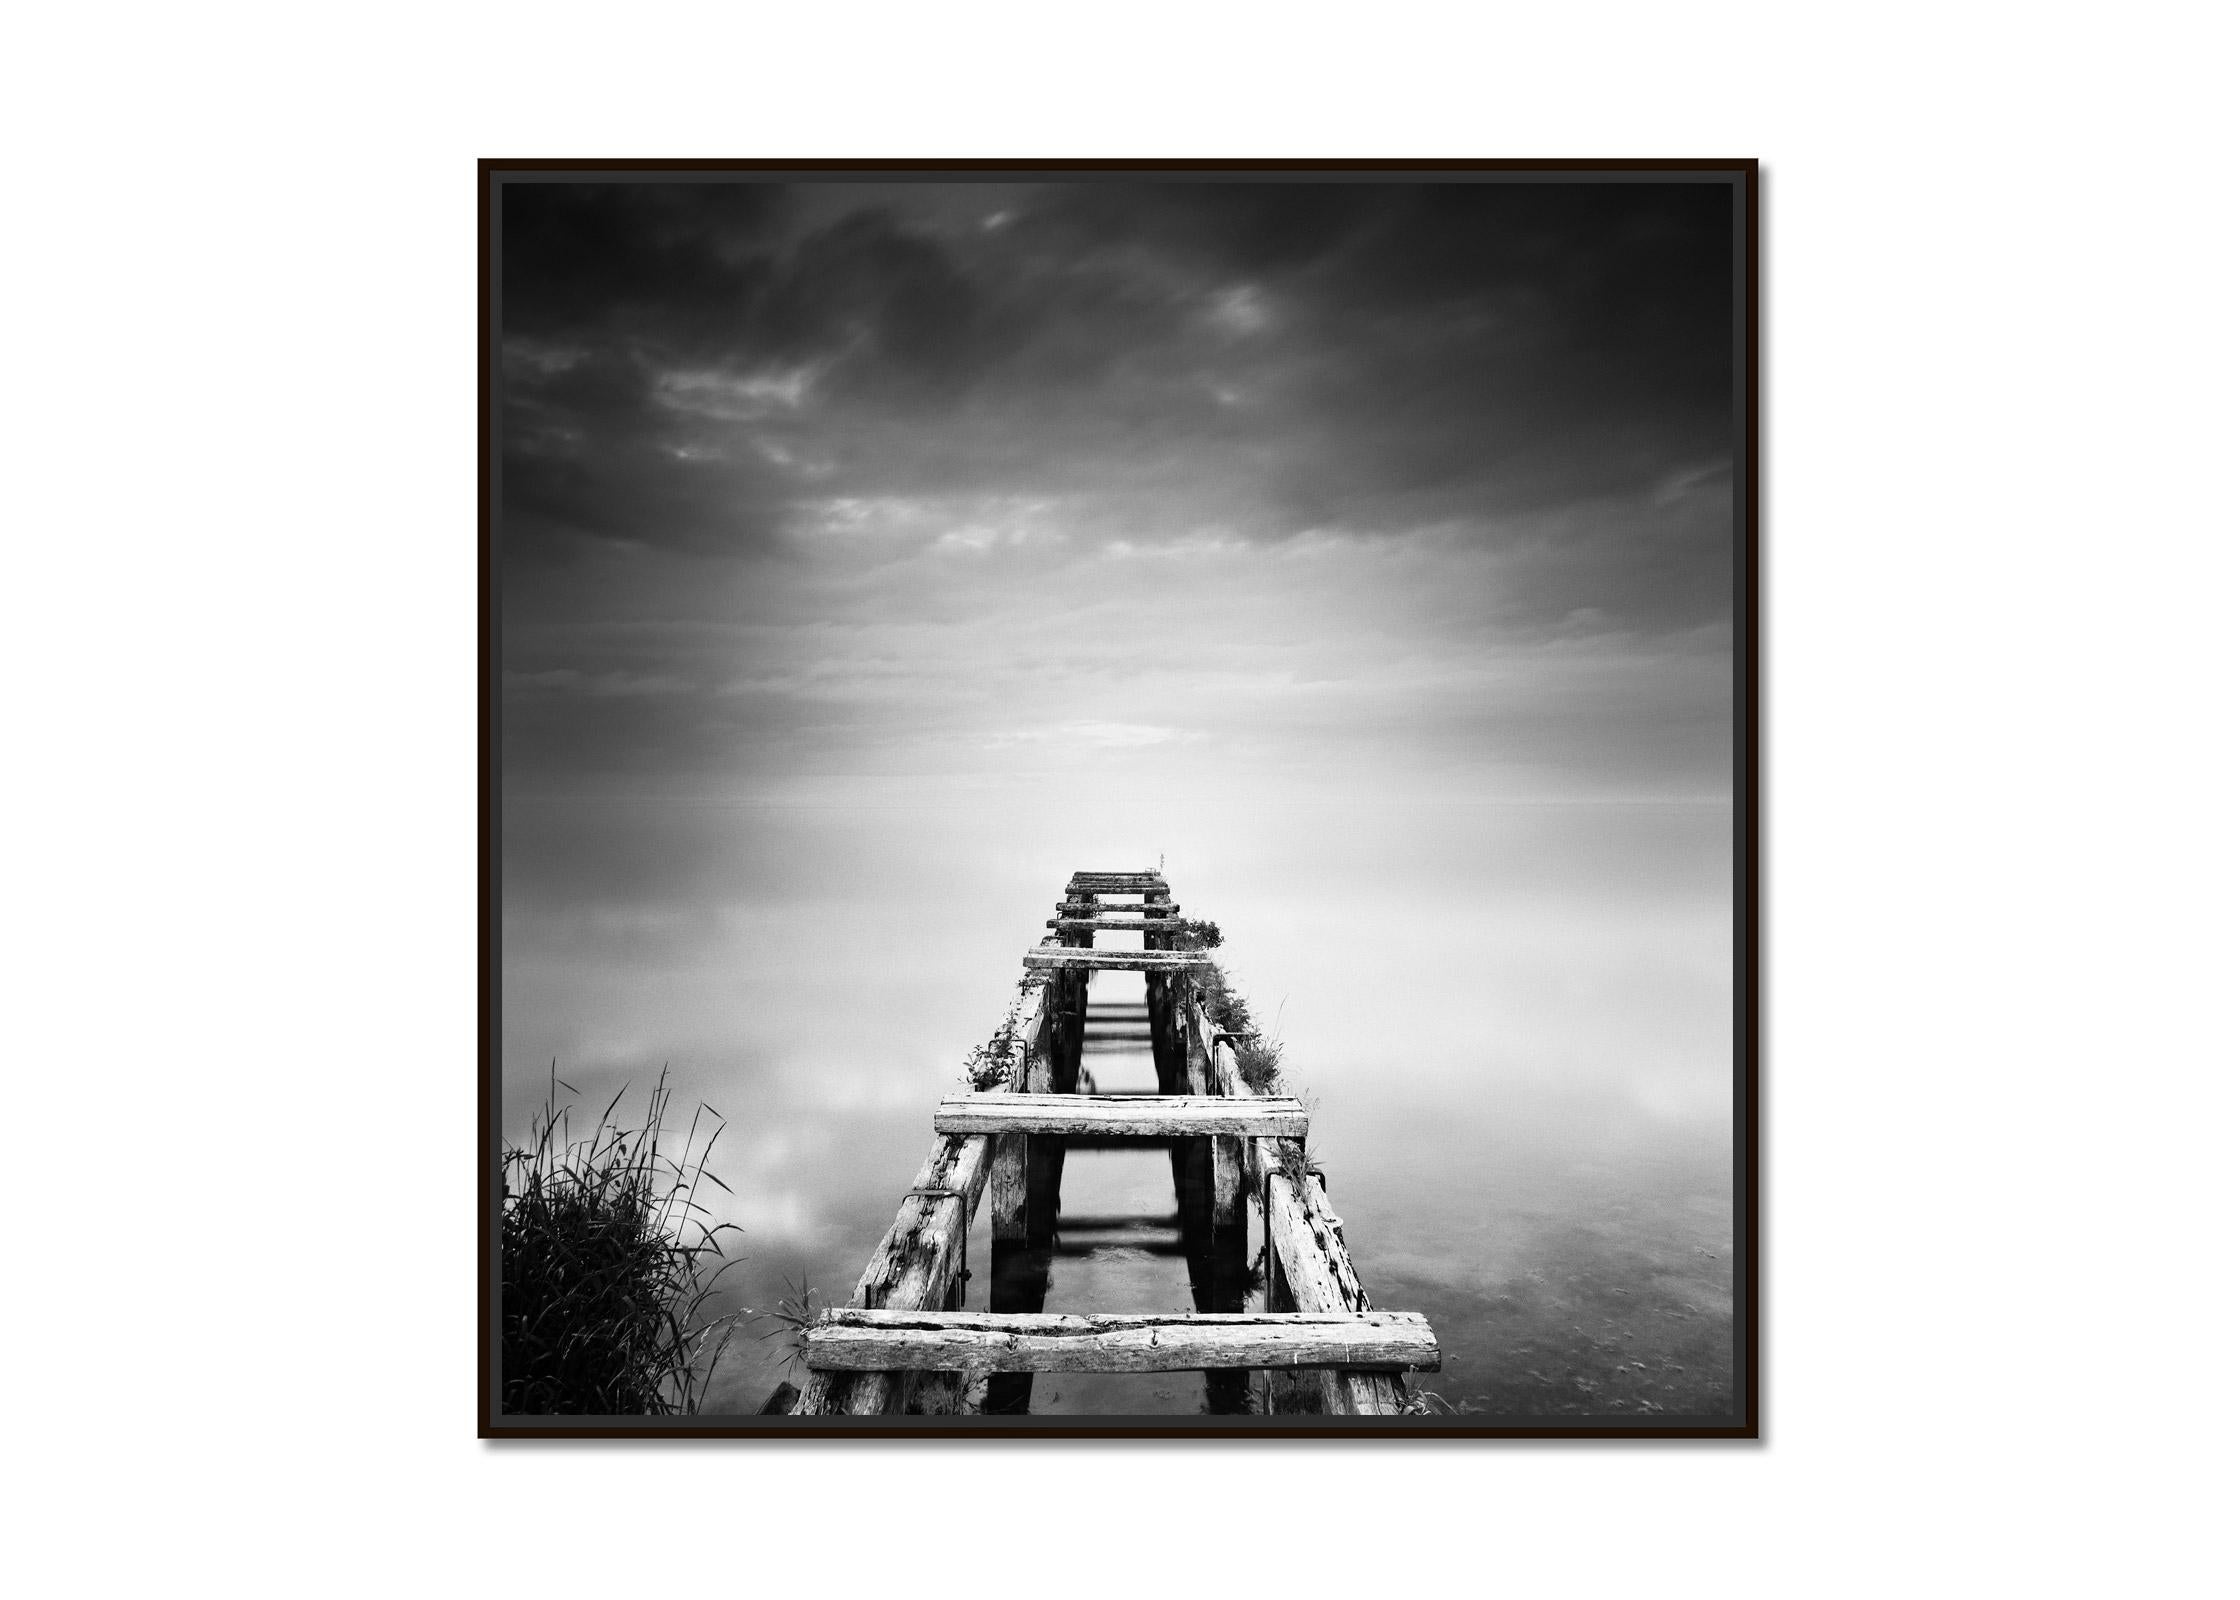 Abandoned Pier, foggy, sunset, Ireland, black and white seascape art photography - Photograph by Gerald Berghammer